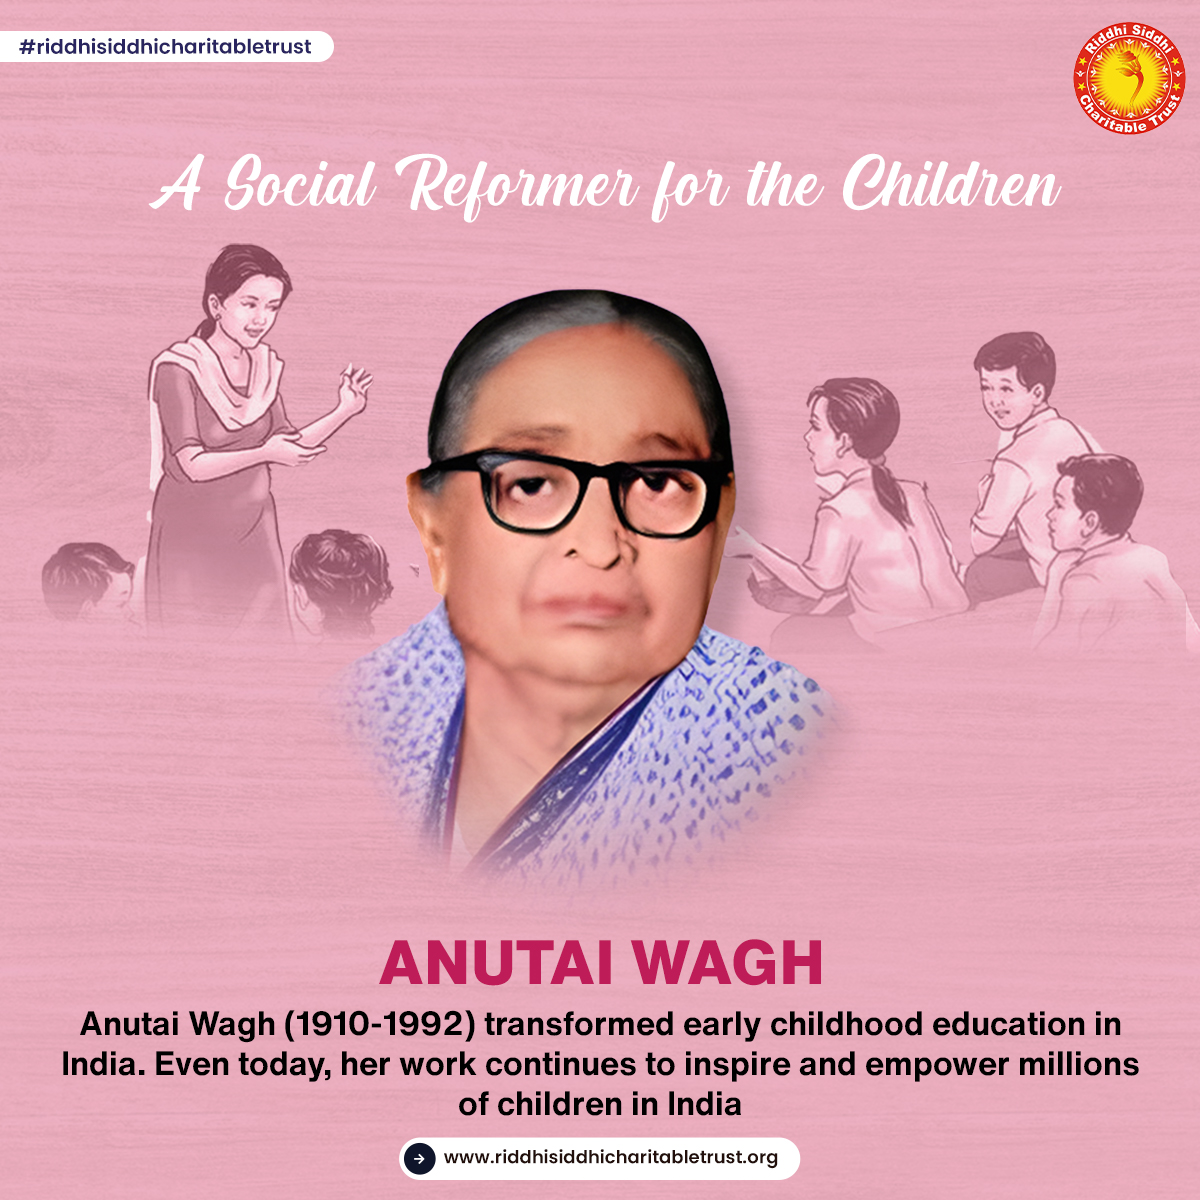 Anutai Wagh's tireless efforts revolutionized education and women's empowerment in India. Support our programs to bring about a real change in education for children. . . #AnutaiWagh #education #teaching #educationmatters #learning #socialwork #knowledge #women #empowerment